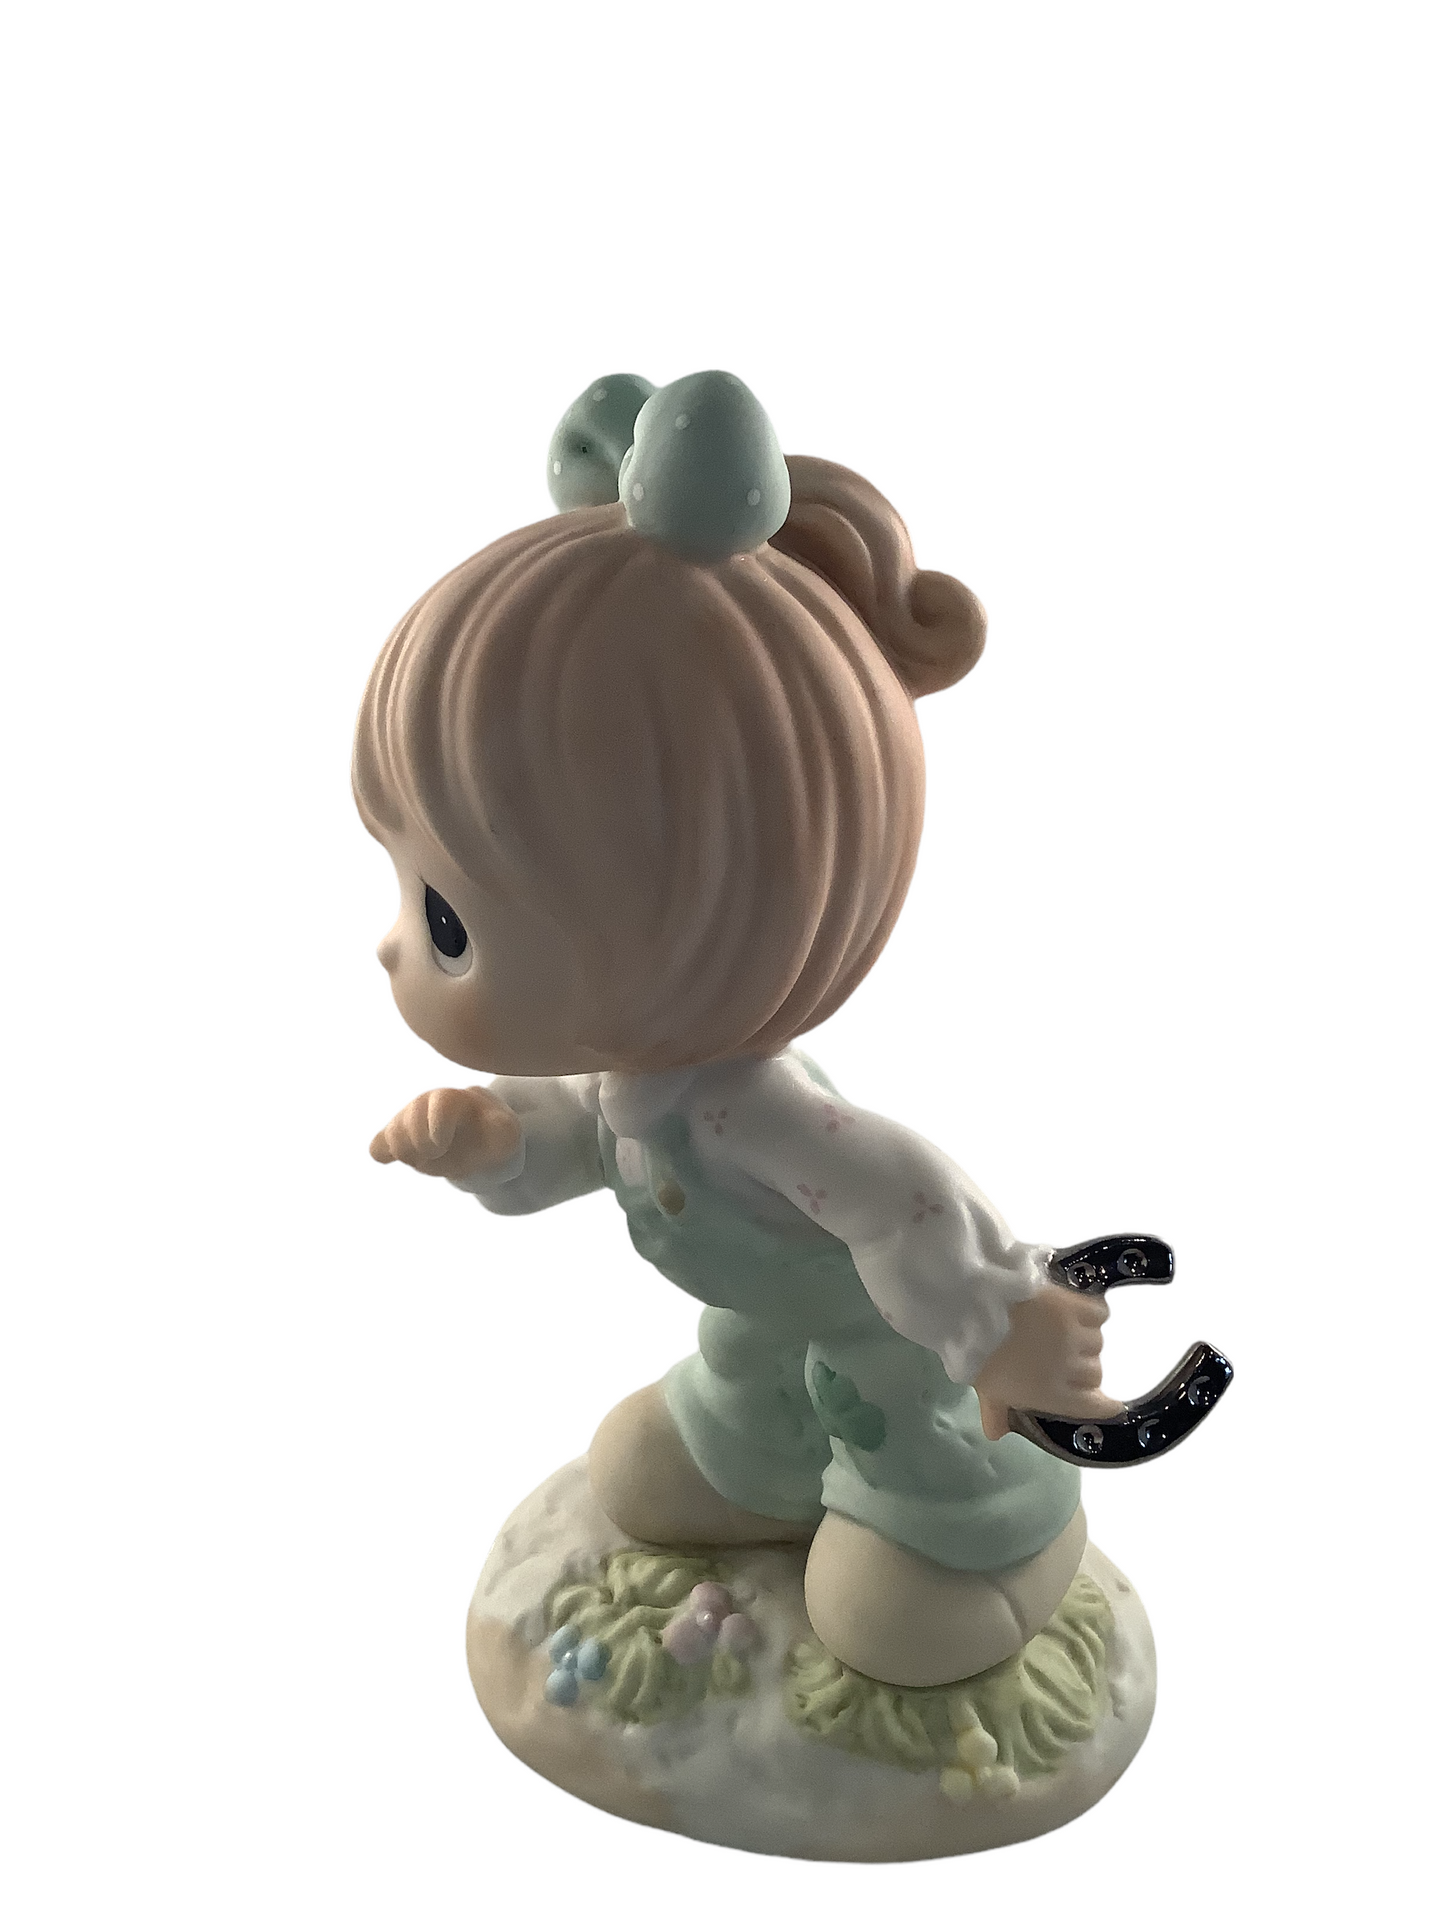 Tossing A Little Luck Your Way - Precious Moment Figurine